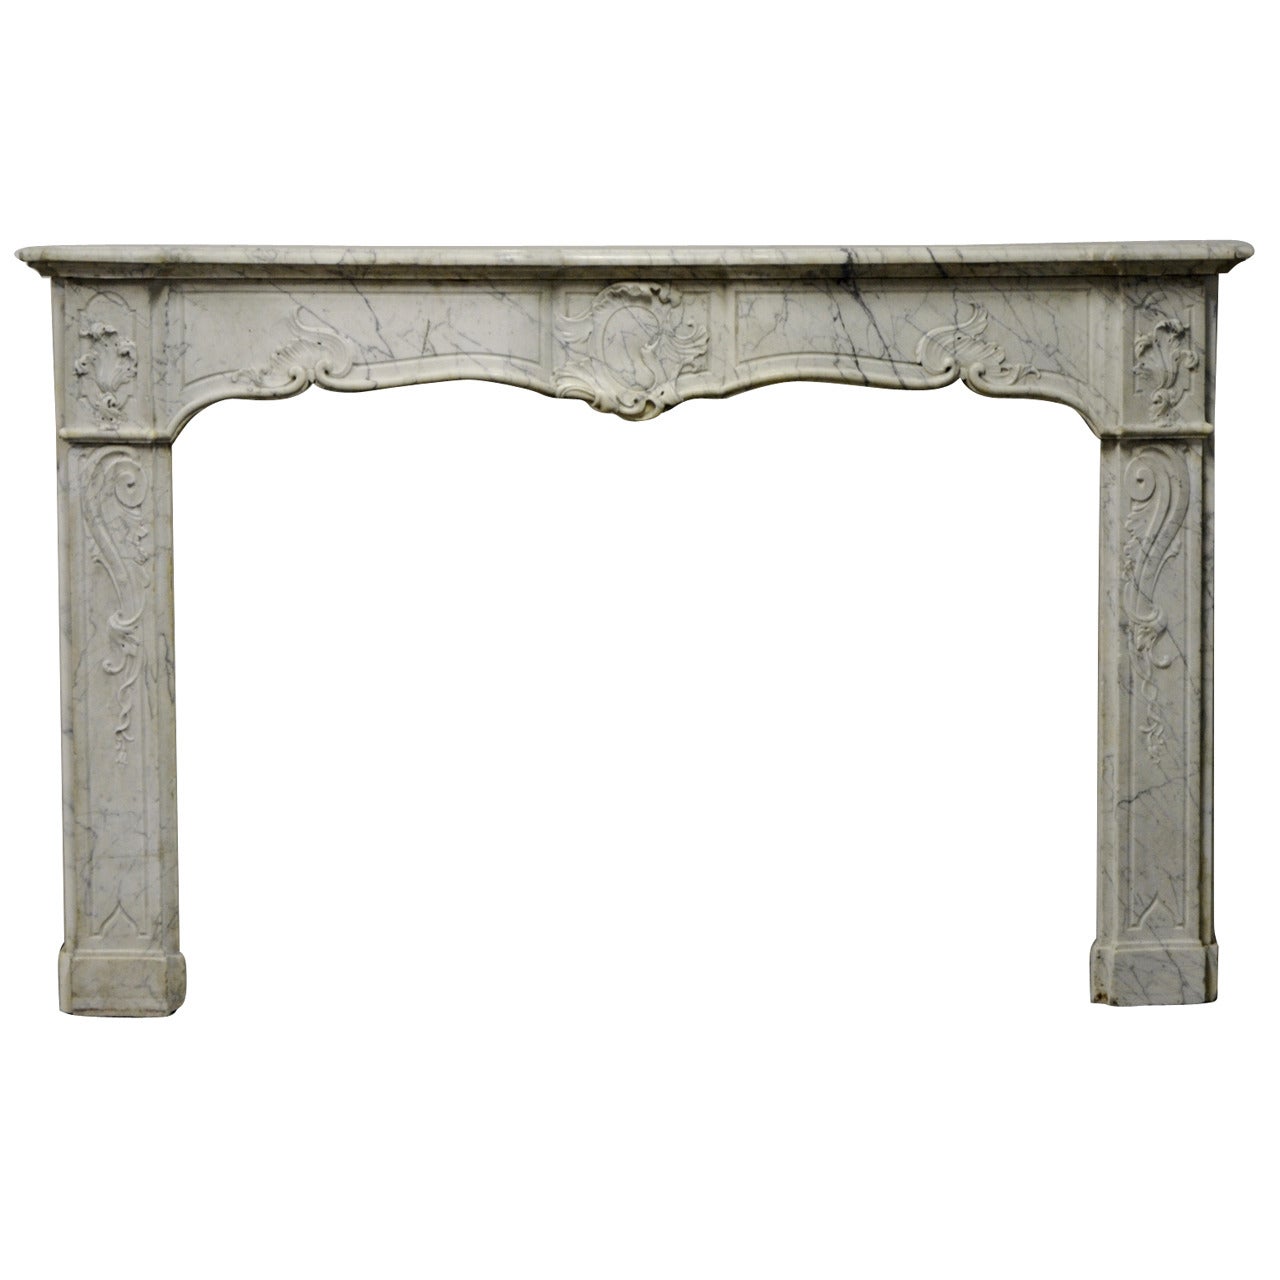 18th Century French Régence Fireplace in White Marble